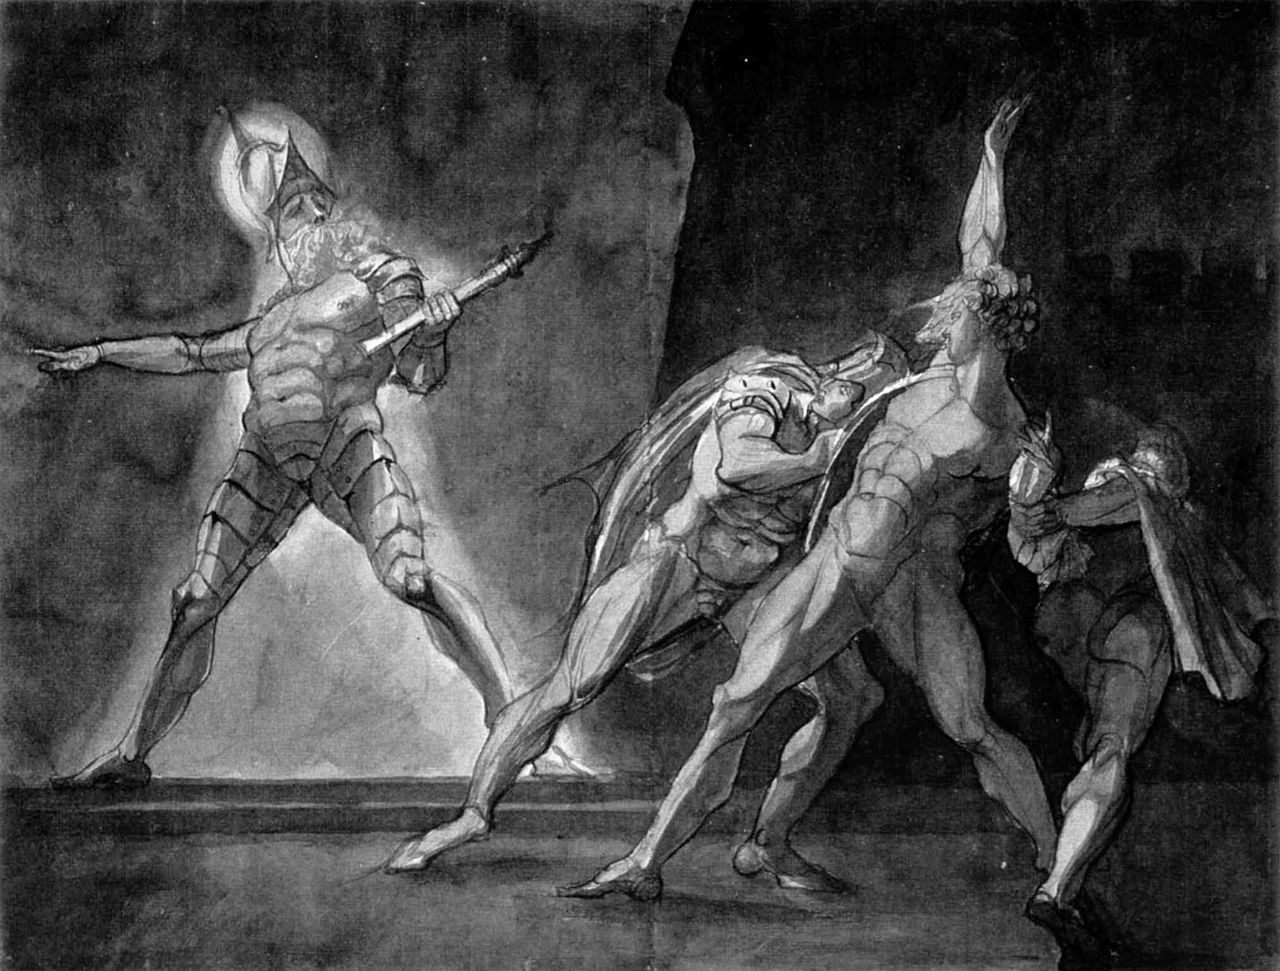 Hamlet, Horatio, Marcellus, and the Ghost of Hamlet's Father. Henry Fuseli, 1780–5. Kunsthaus Zürich.